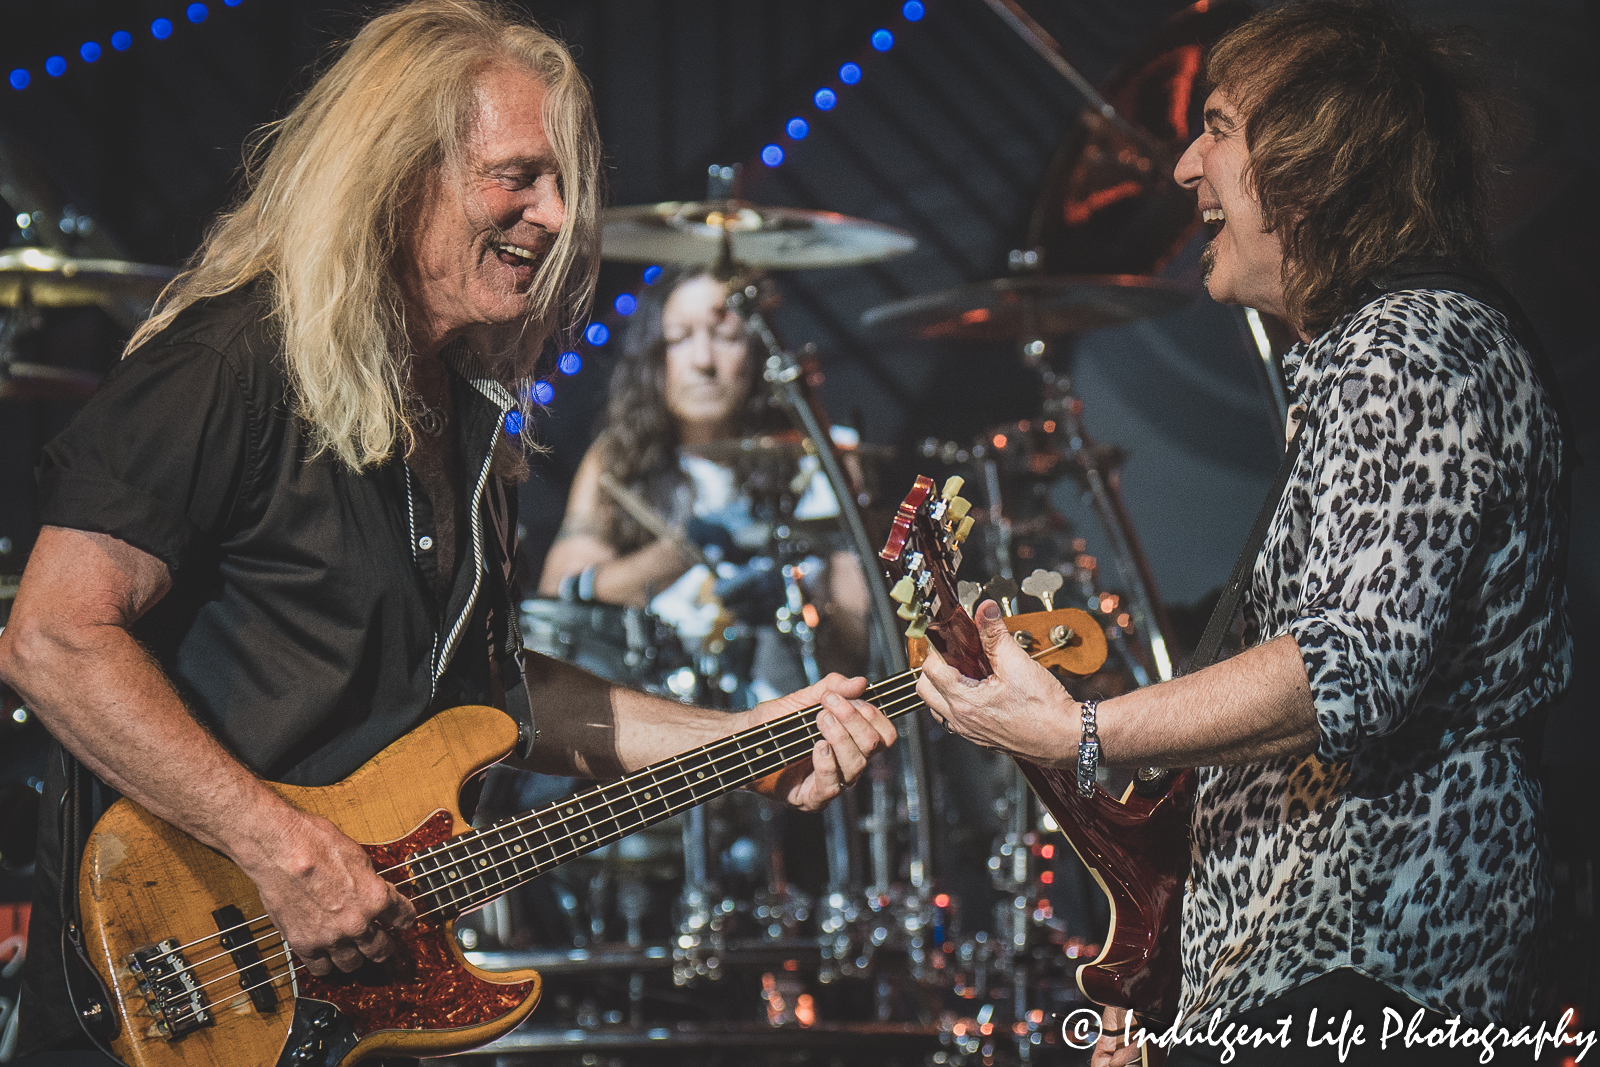 REO Speedwagon band members Bruce Hall, Bryan Hitt and Dave Amato playing together at Starlight Theatre in Kansas City, MO on June 14, 2022.